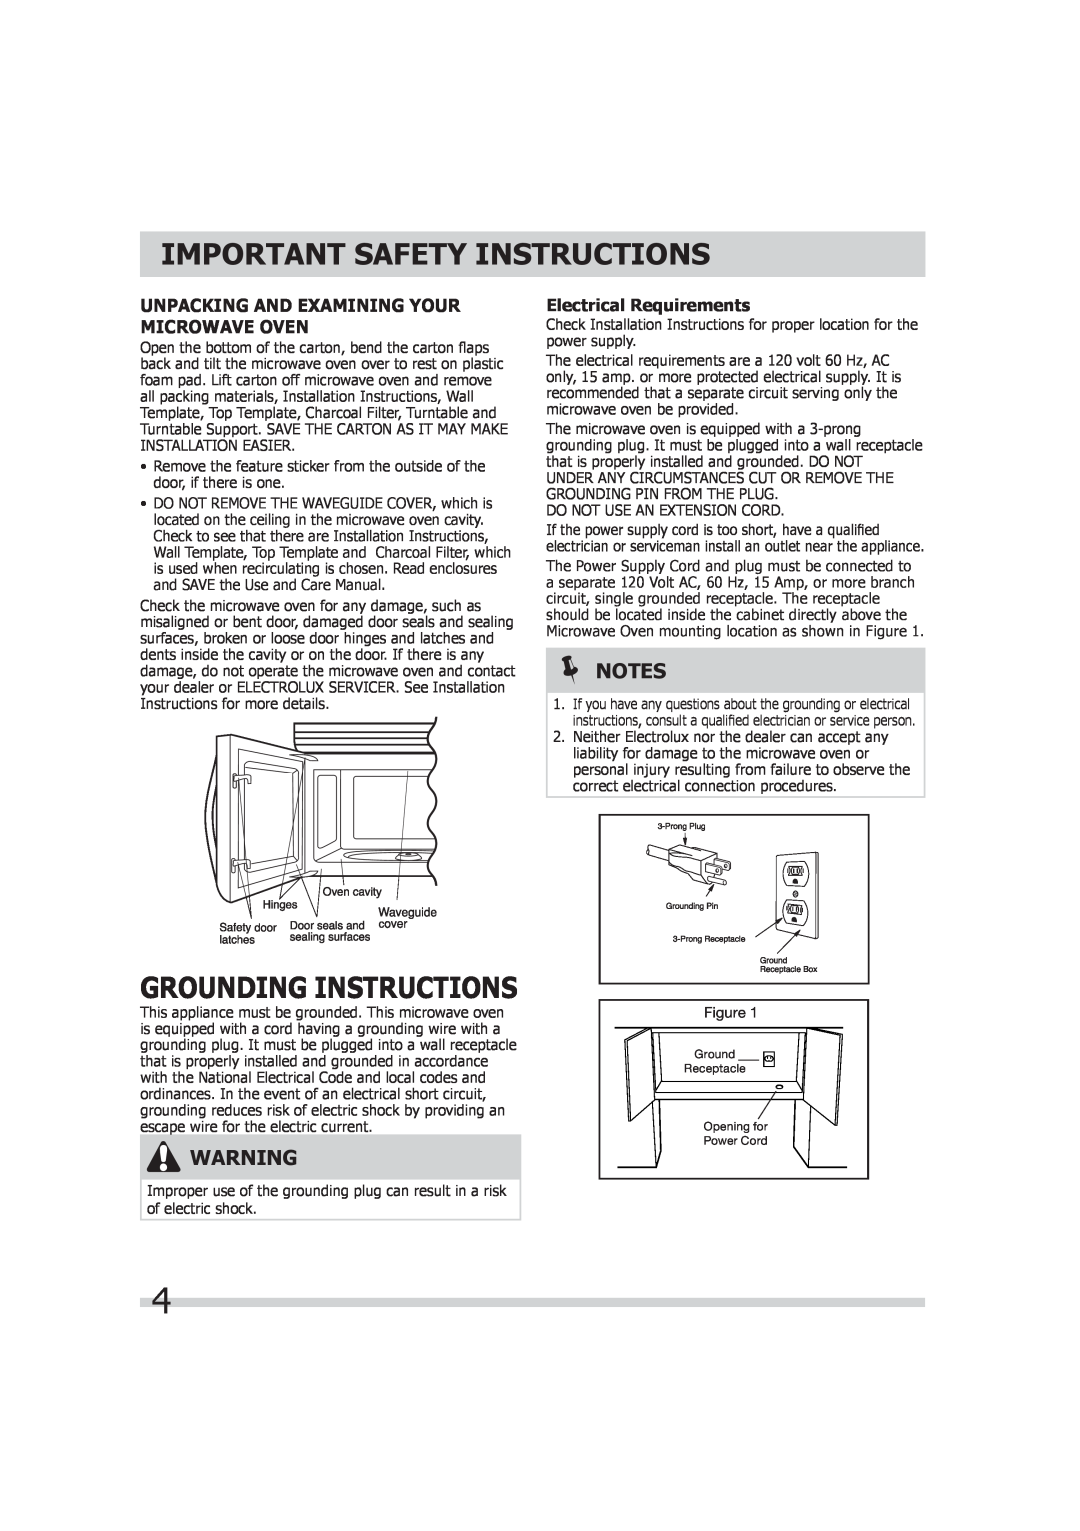 Frigidaire 316495055 Grounding Instructions, Unpacking And Examining Your Microwave Oven, Electrical Requirements 